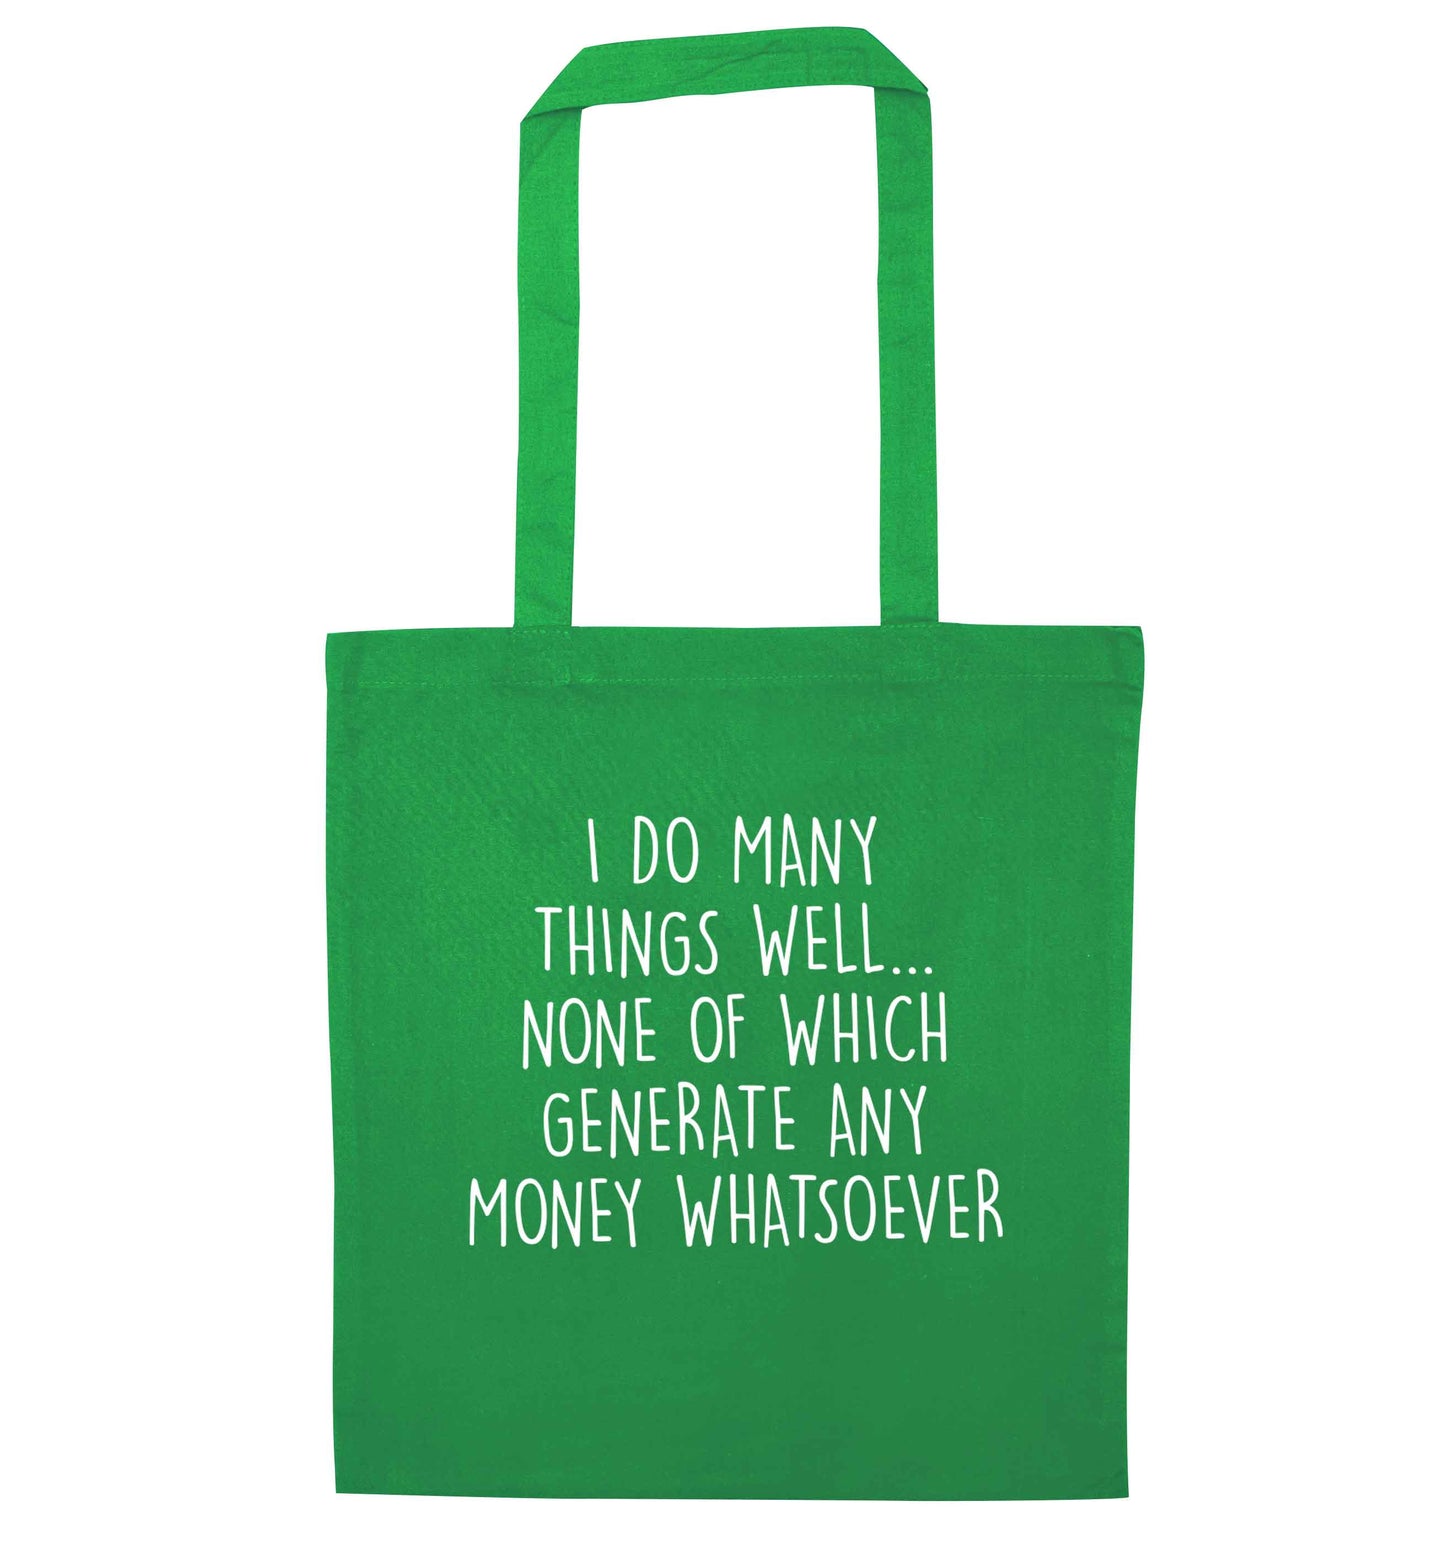 I do many things well none of which generate income green tote bag